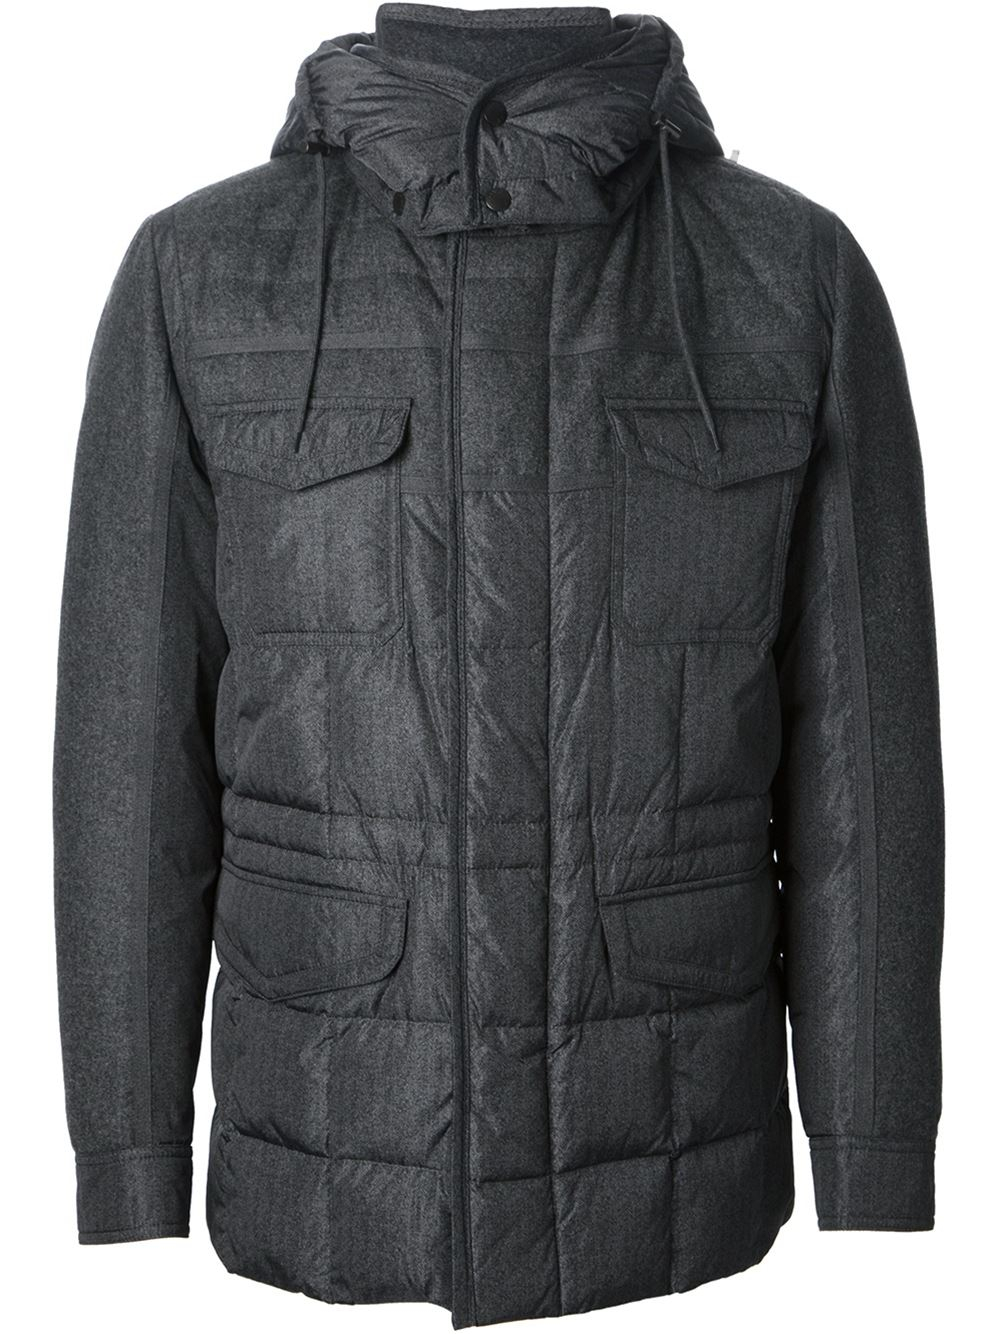 Moncler 'Jacob' Padded Jacket in Grey (Gray) for Men - Lyst